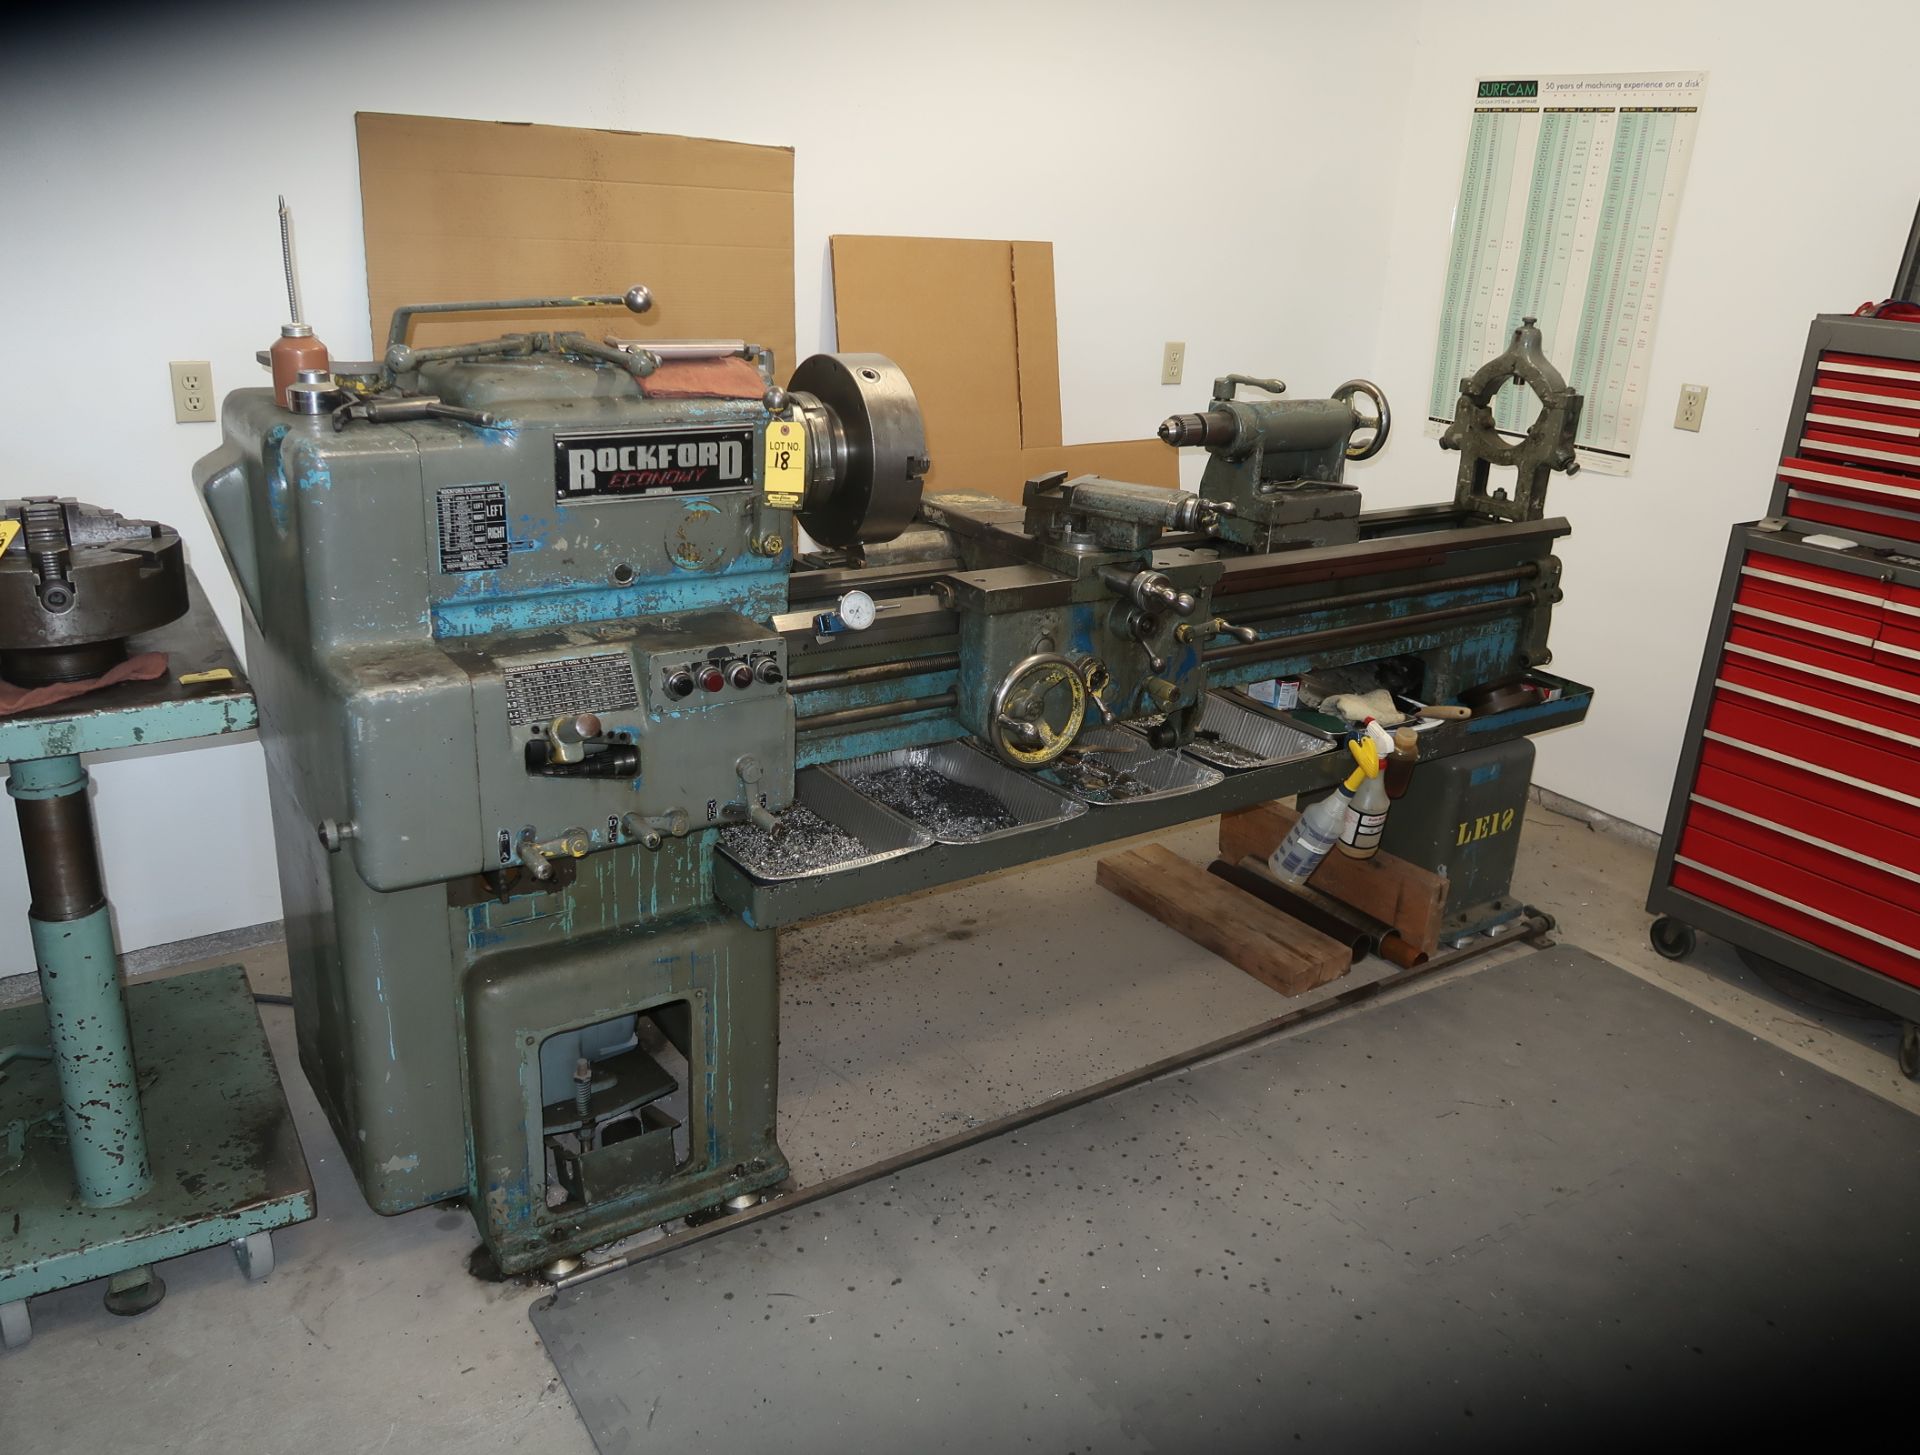 ROCKFORD ECONOMY 110H X 86 ENGINE LATHE, THREADING, TAPPERING ATTACHMENT,3-JAW CHUCK, TAIL STOCK,